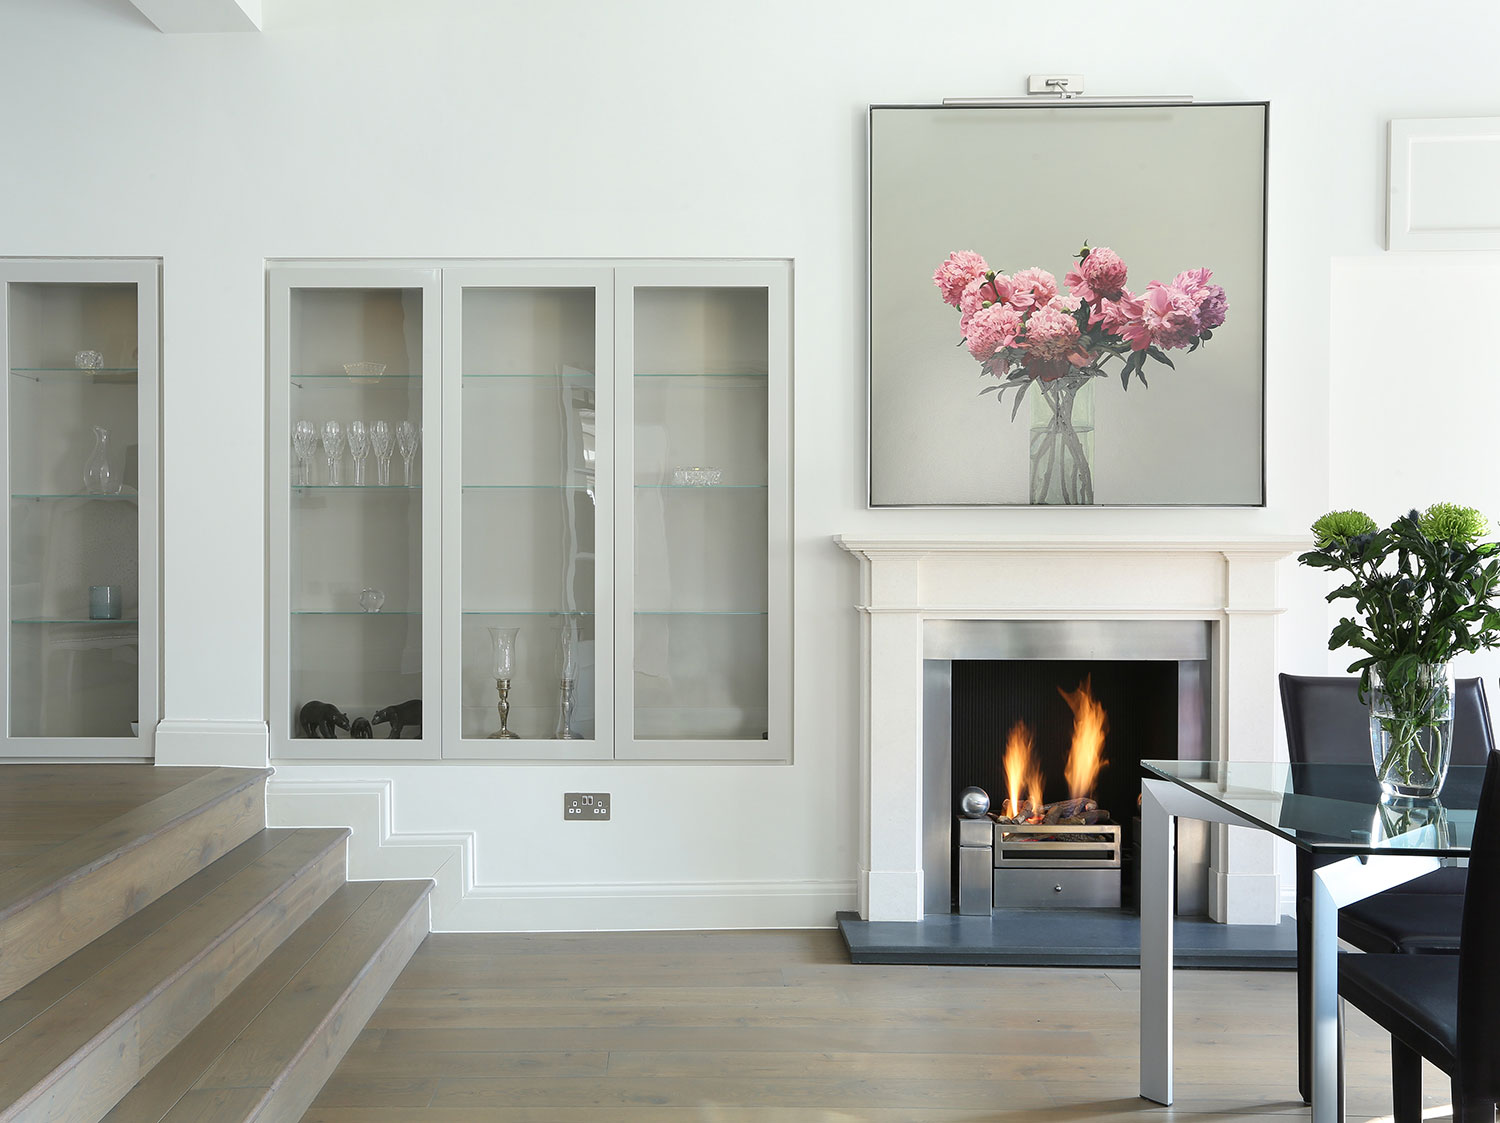 High end interior design project, Hampstead, London